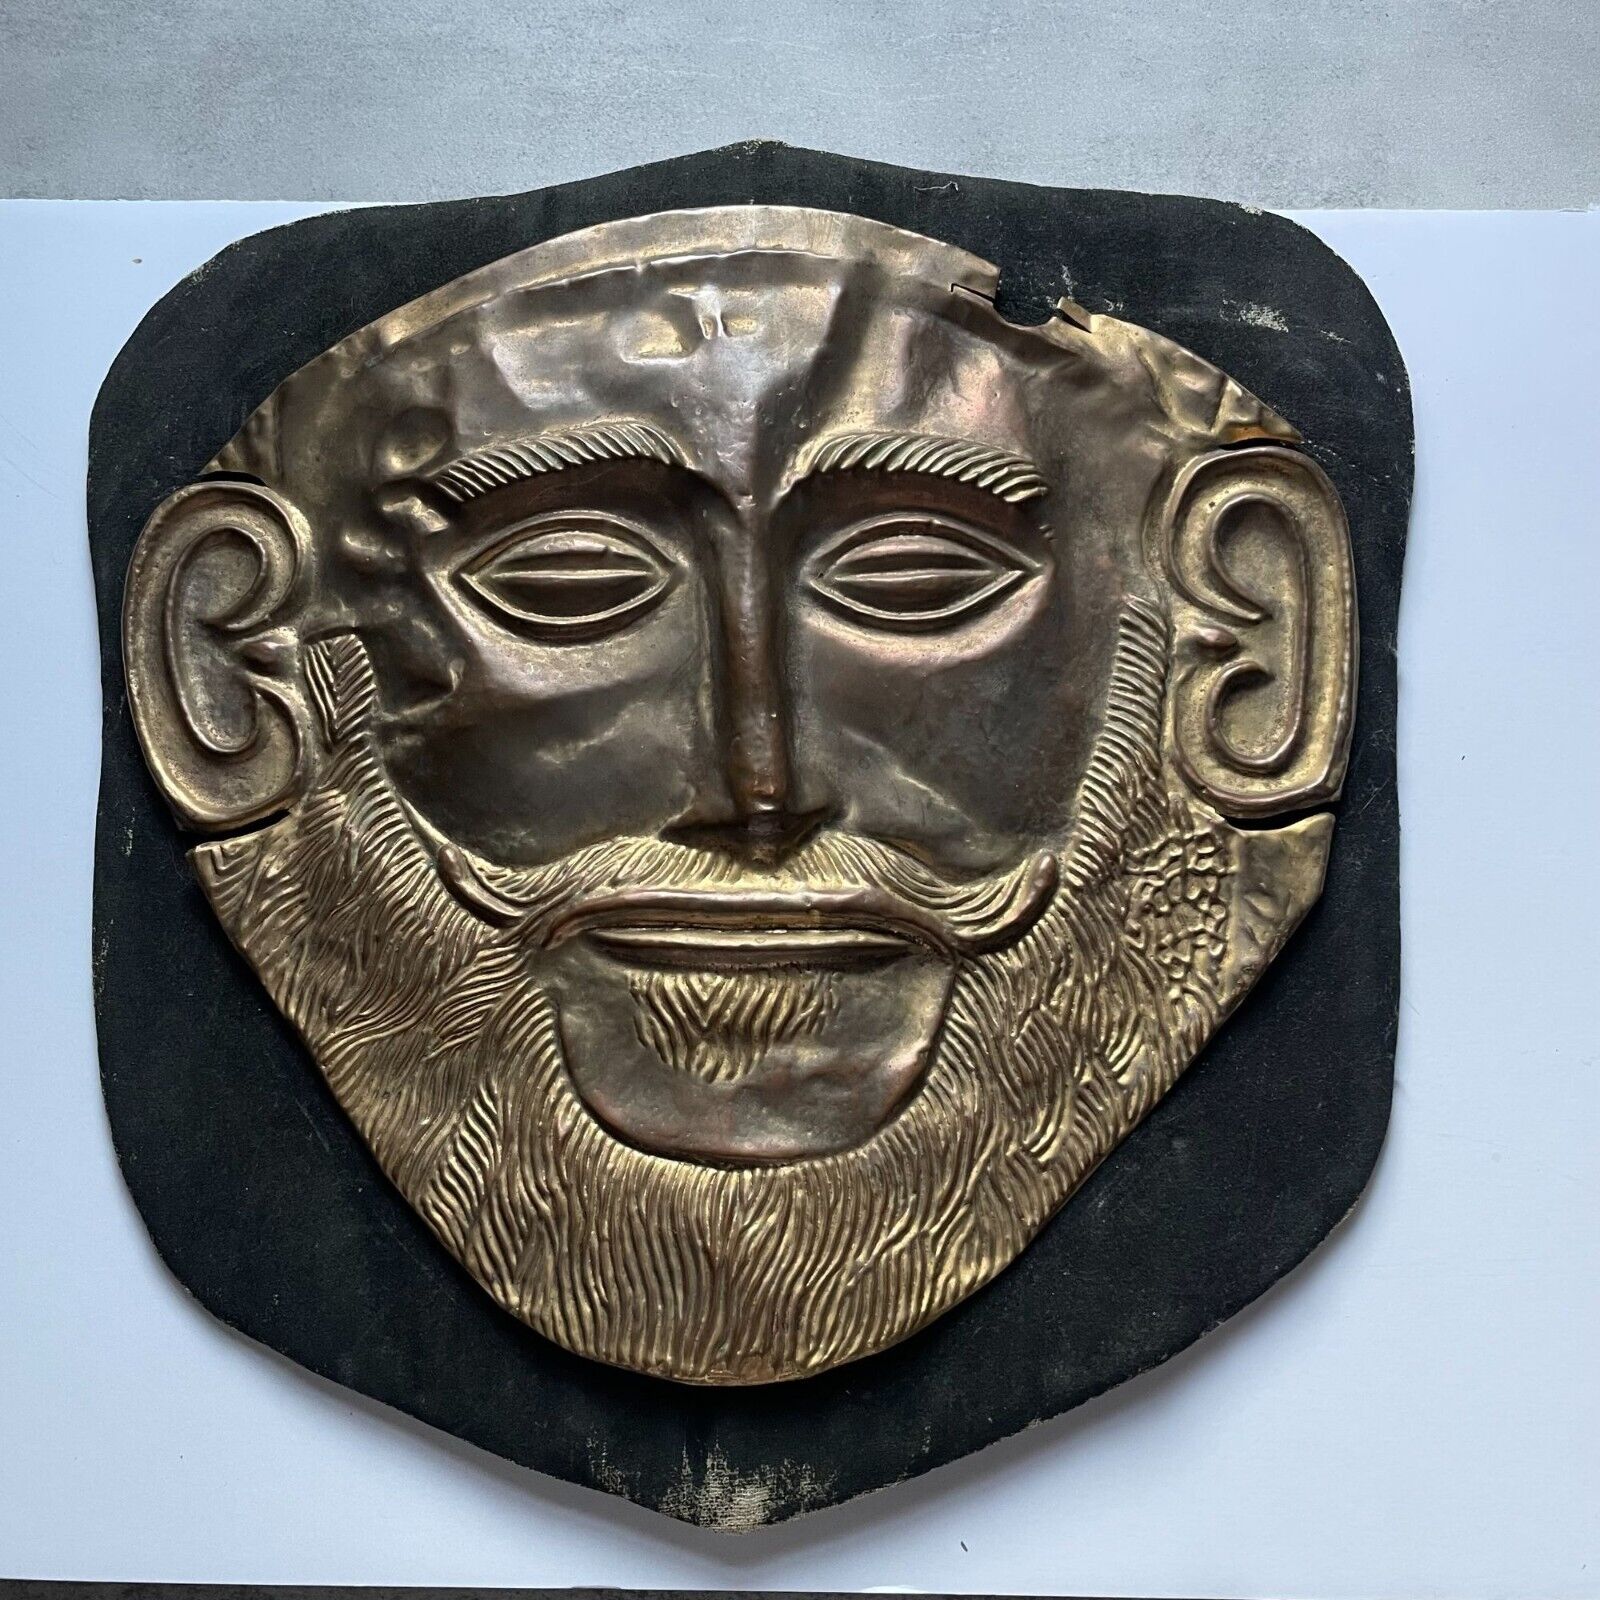 Vintage Mask of Agamemnon Mycenaean Death Mask Brass Reproduction 16th Cent BC